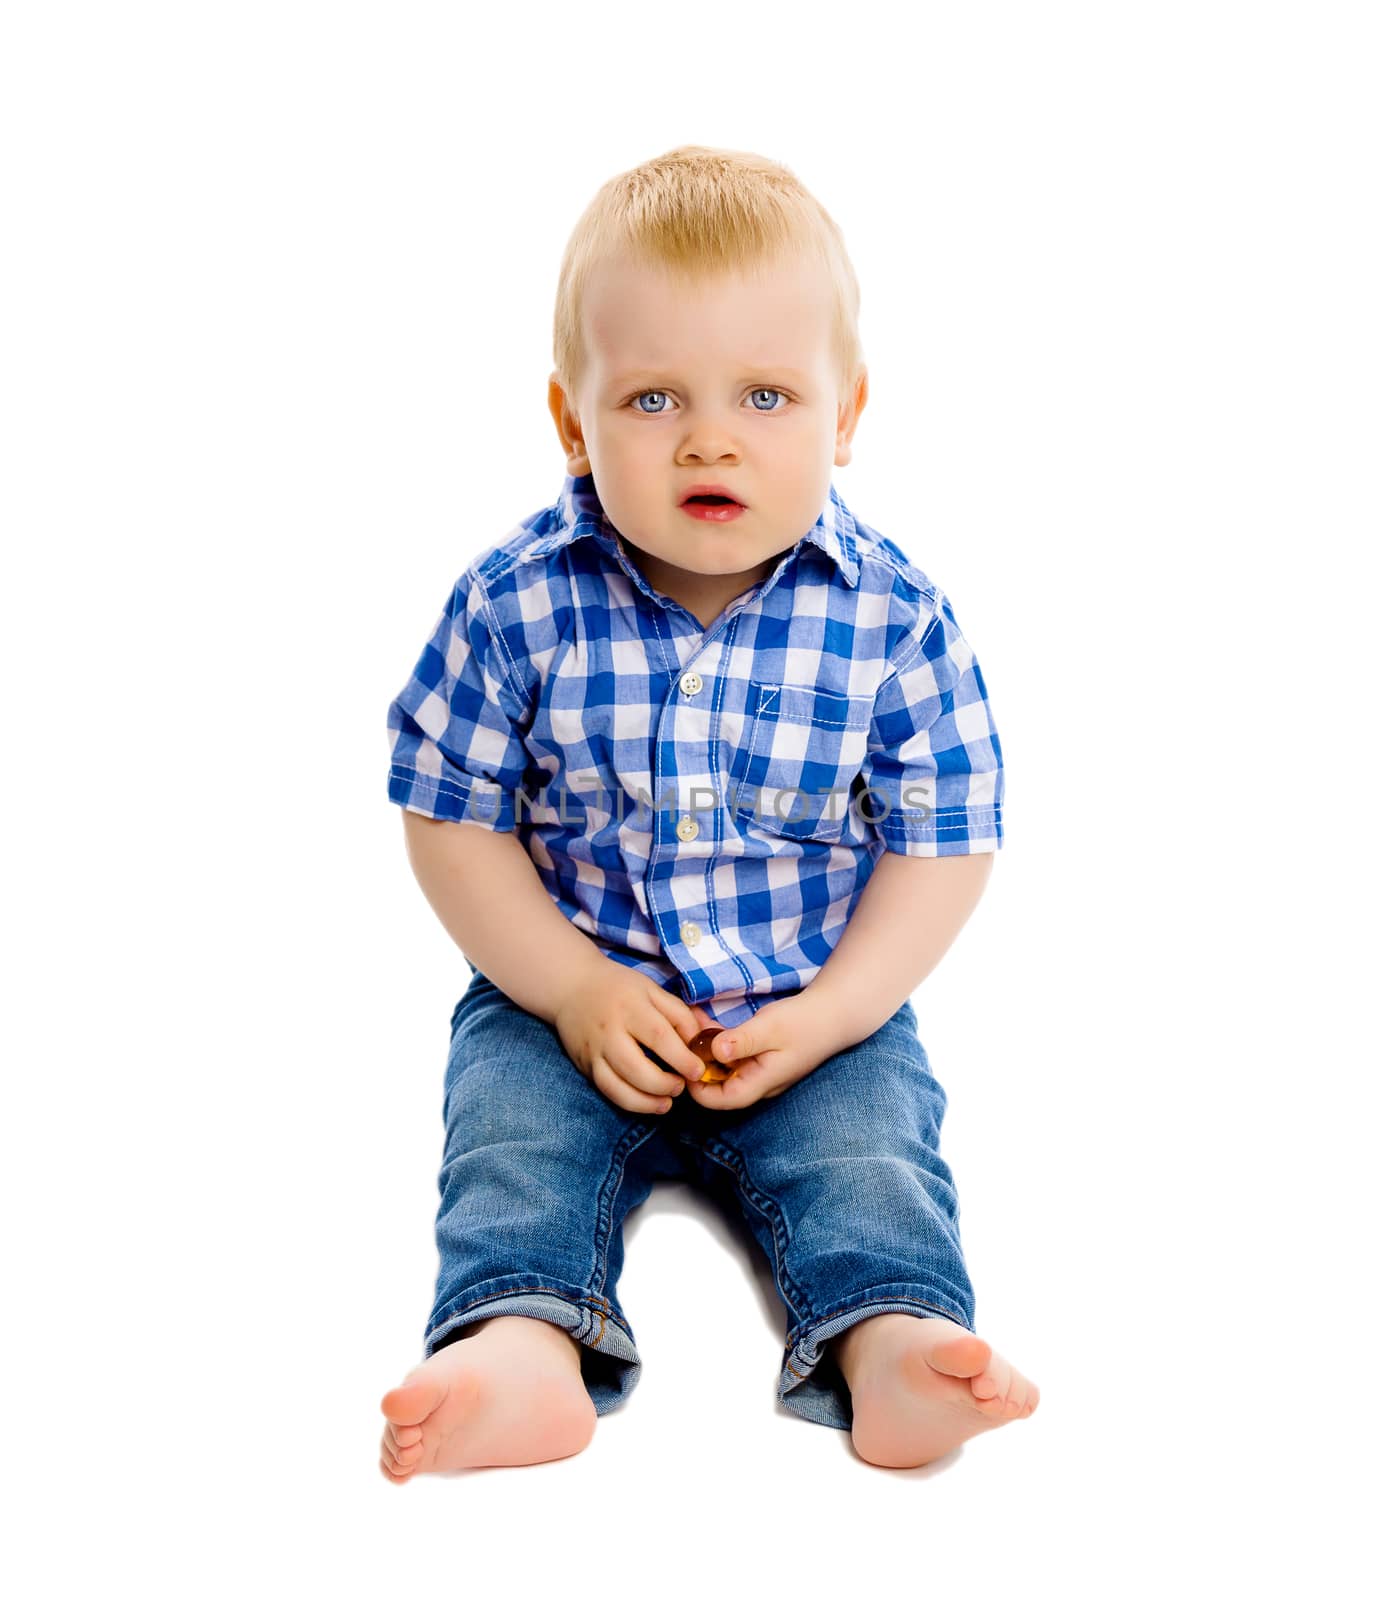 Little dissatisfied boy in a plaid shirt and jeans on white background